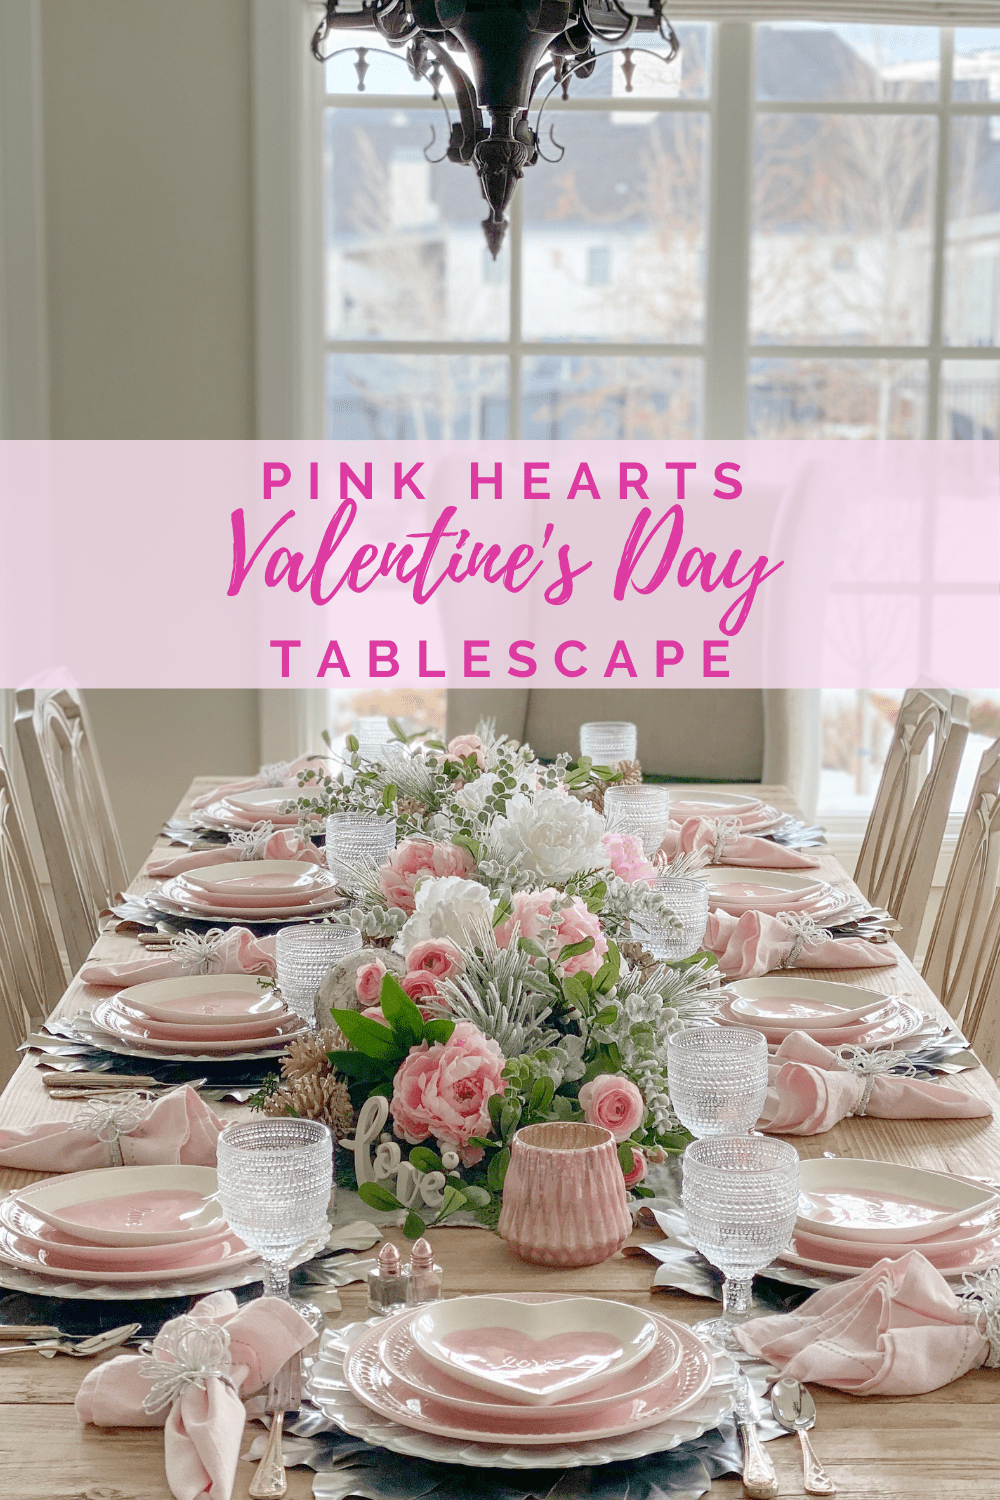 Sharing my festive pink hearts valentines day tablescape for a beautiful Valentines or Galentines Day celebration